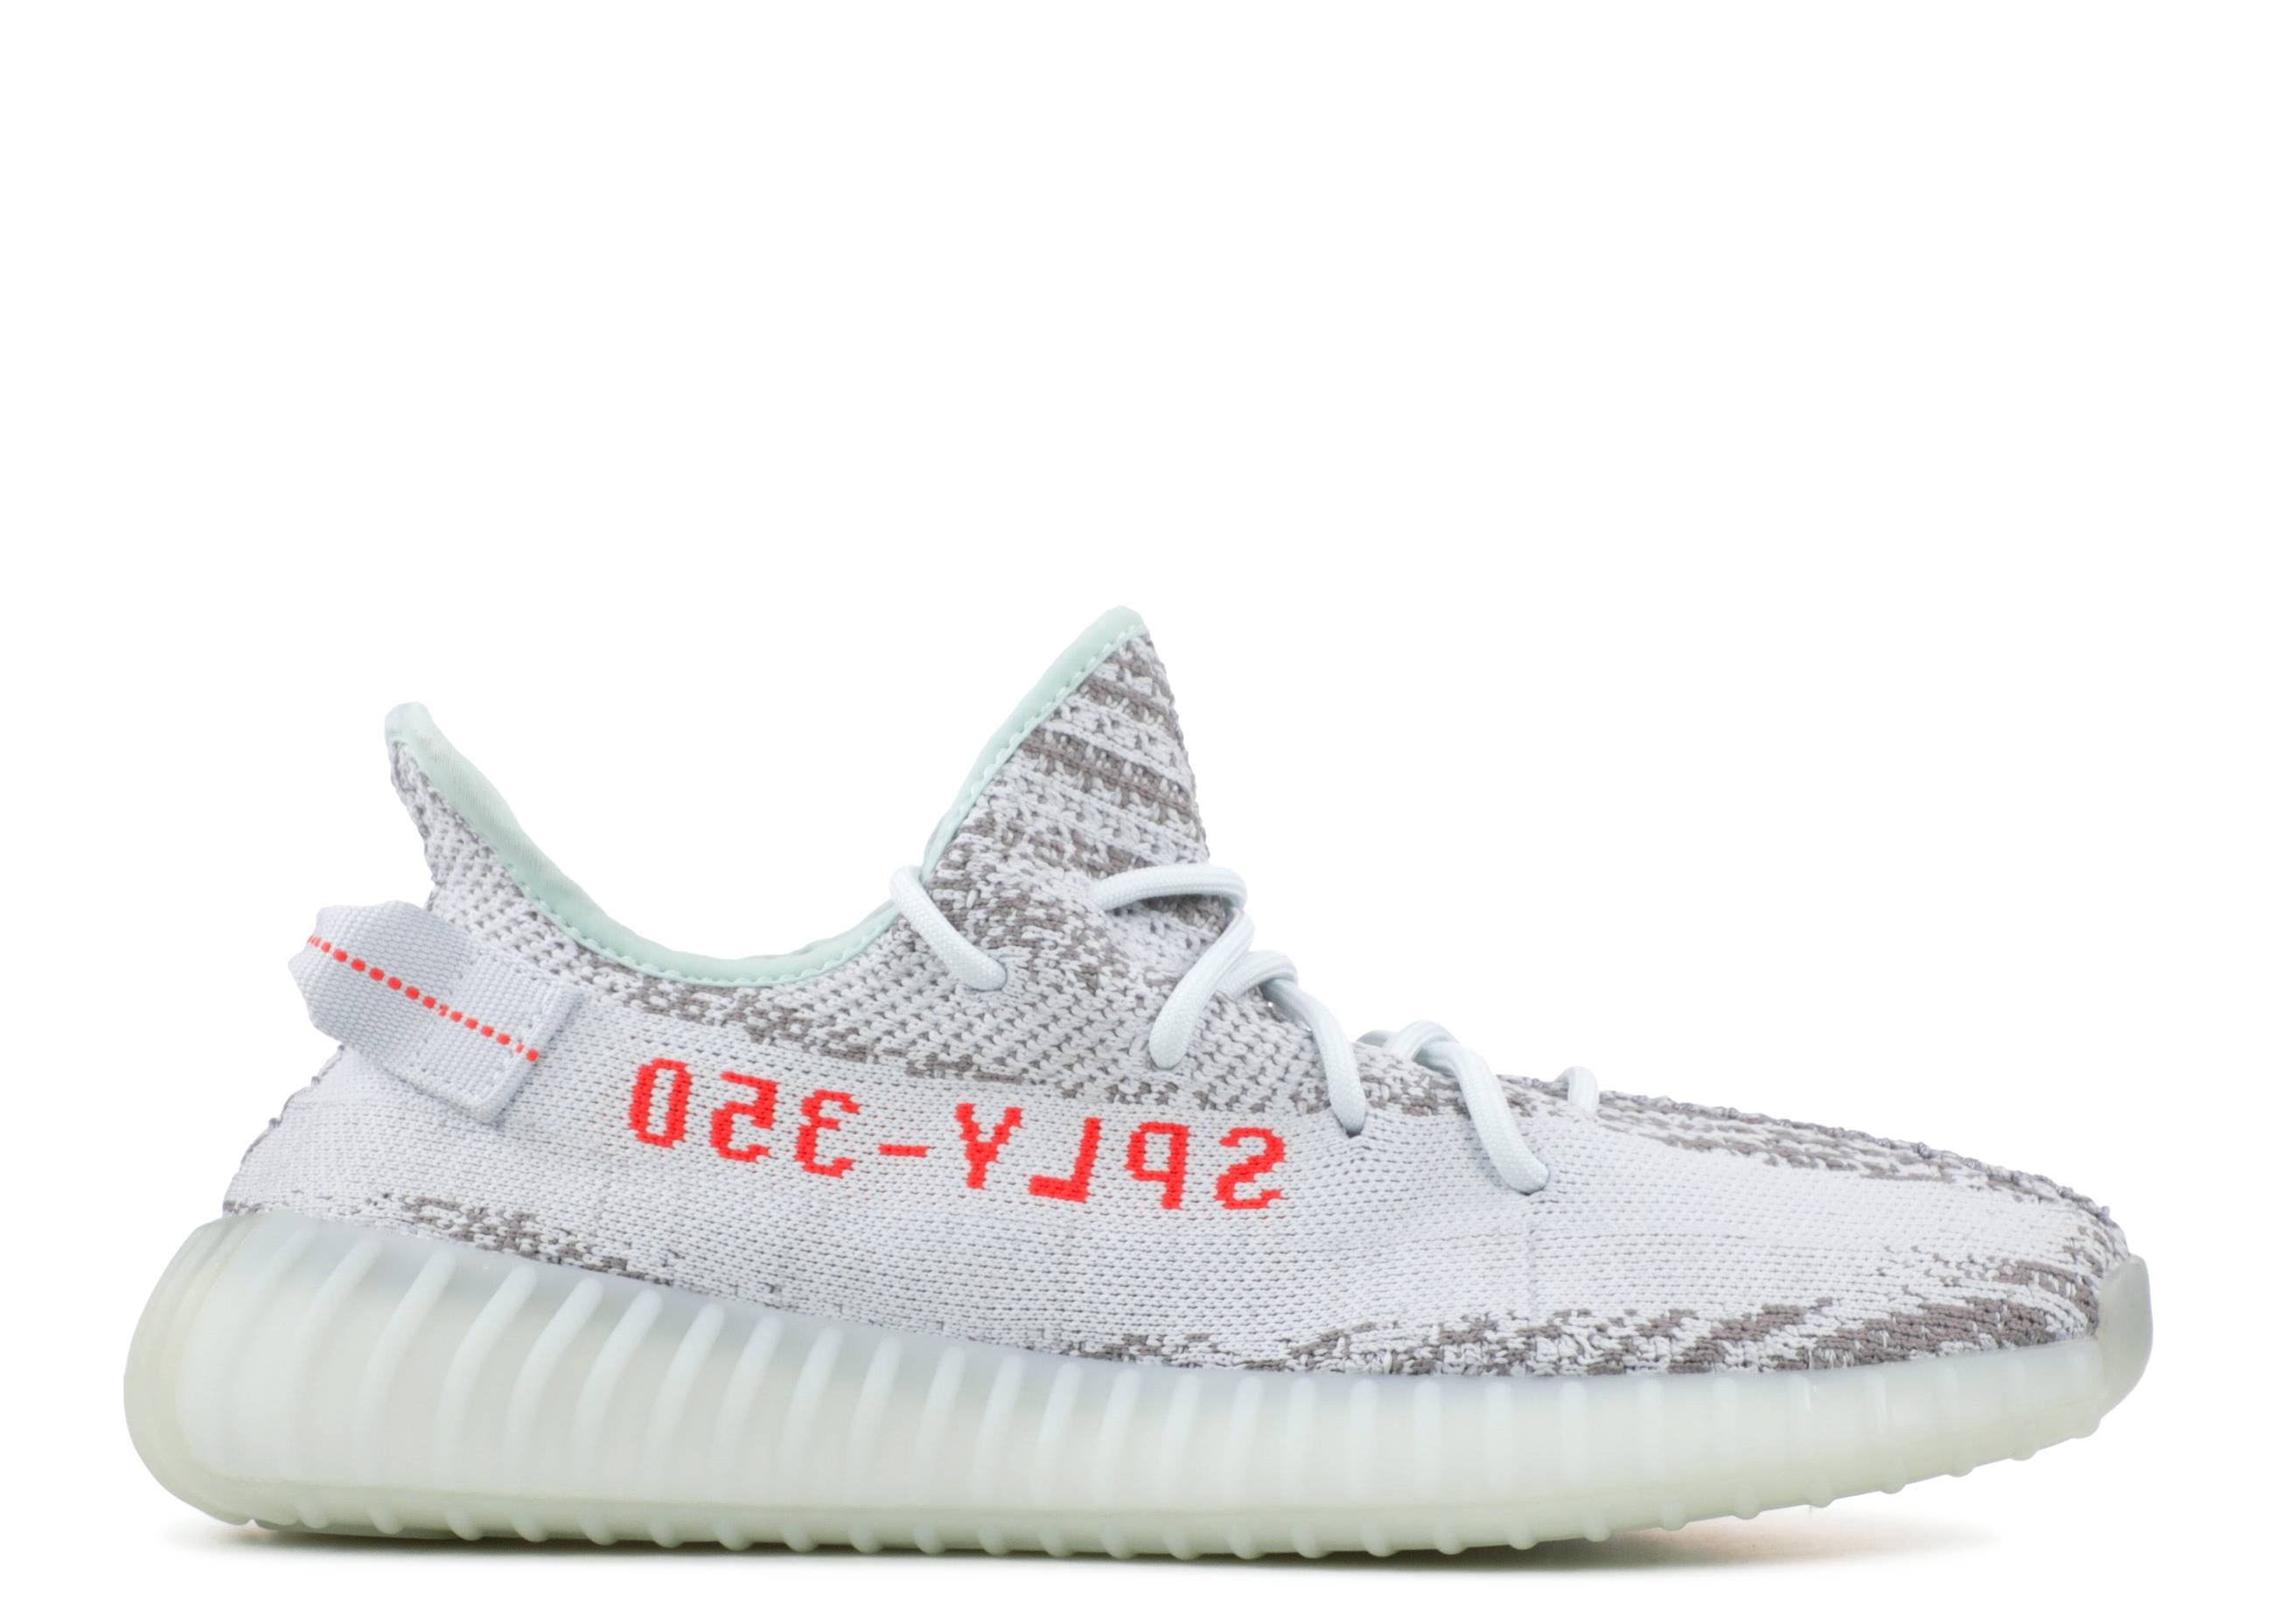 yeasses oxford tan yeezy sneakers sale V2 Blue Tint